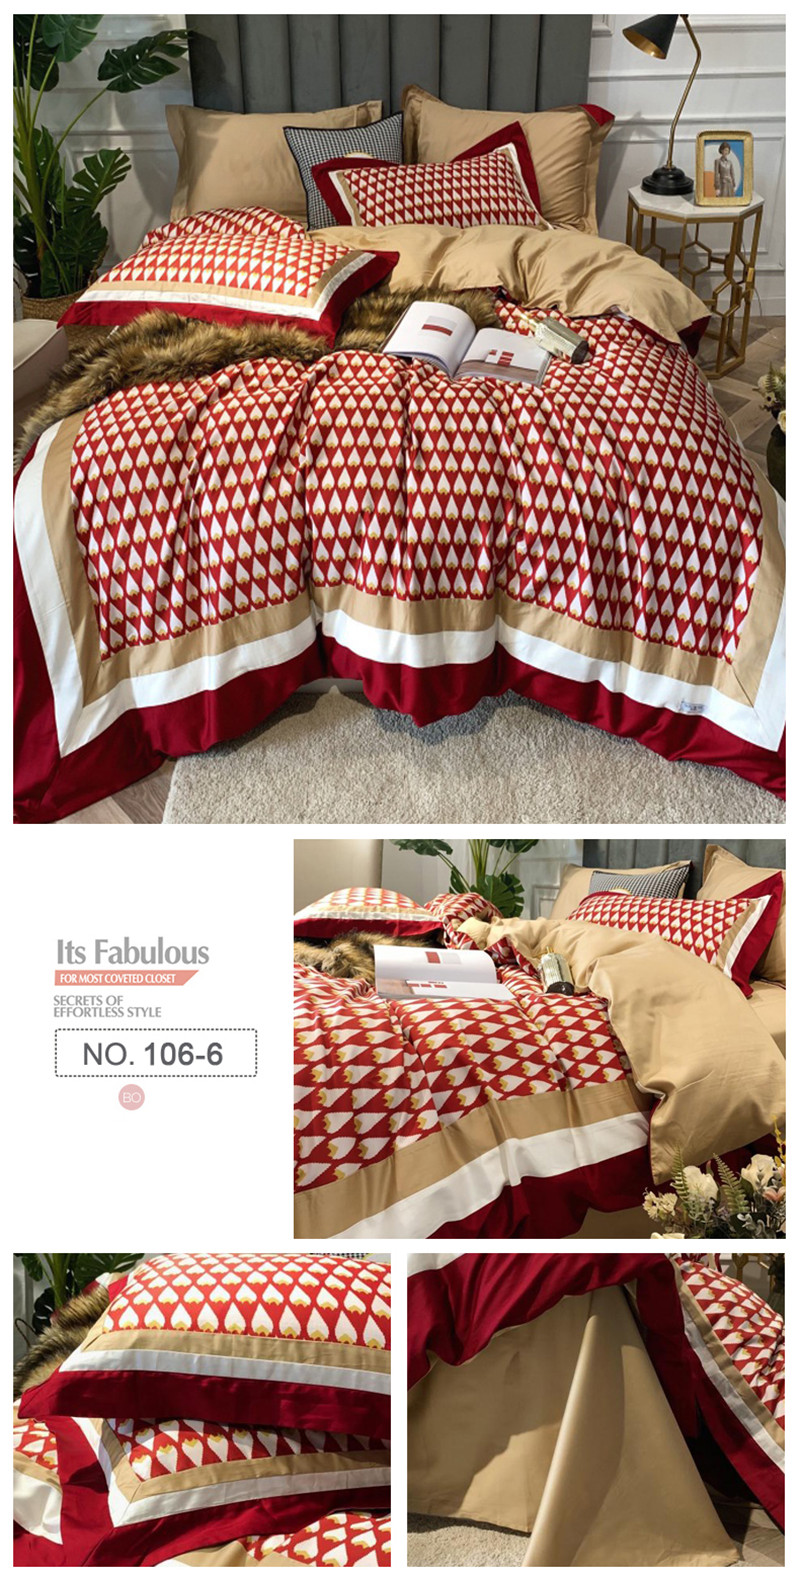 For 3PCS Full Bedding Fashion Style